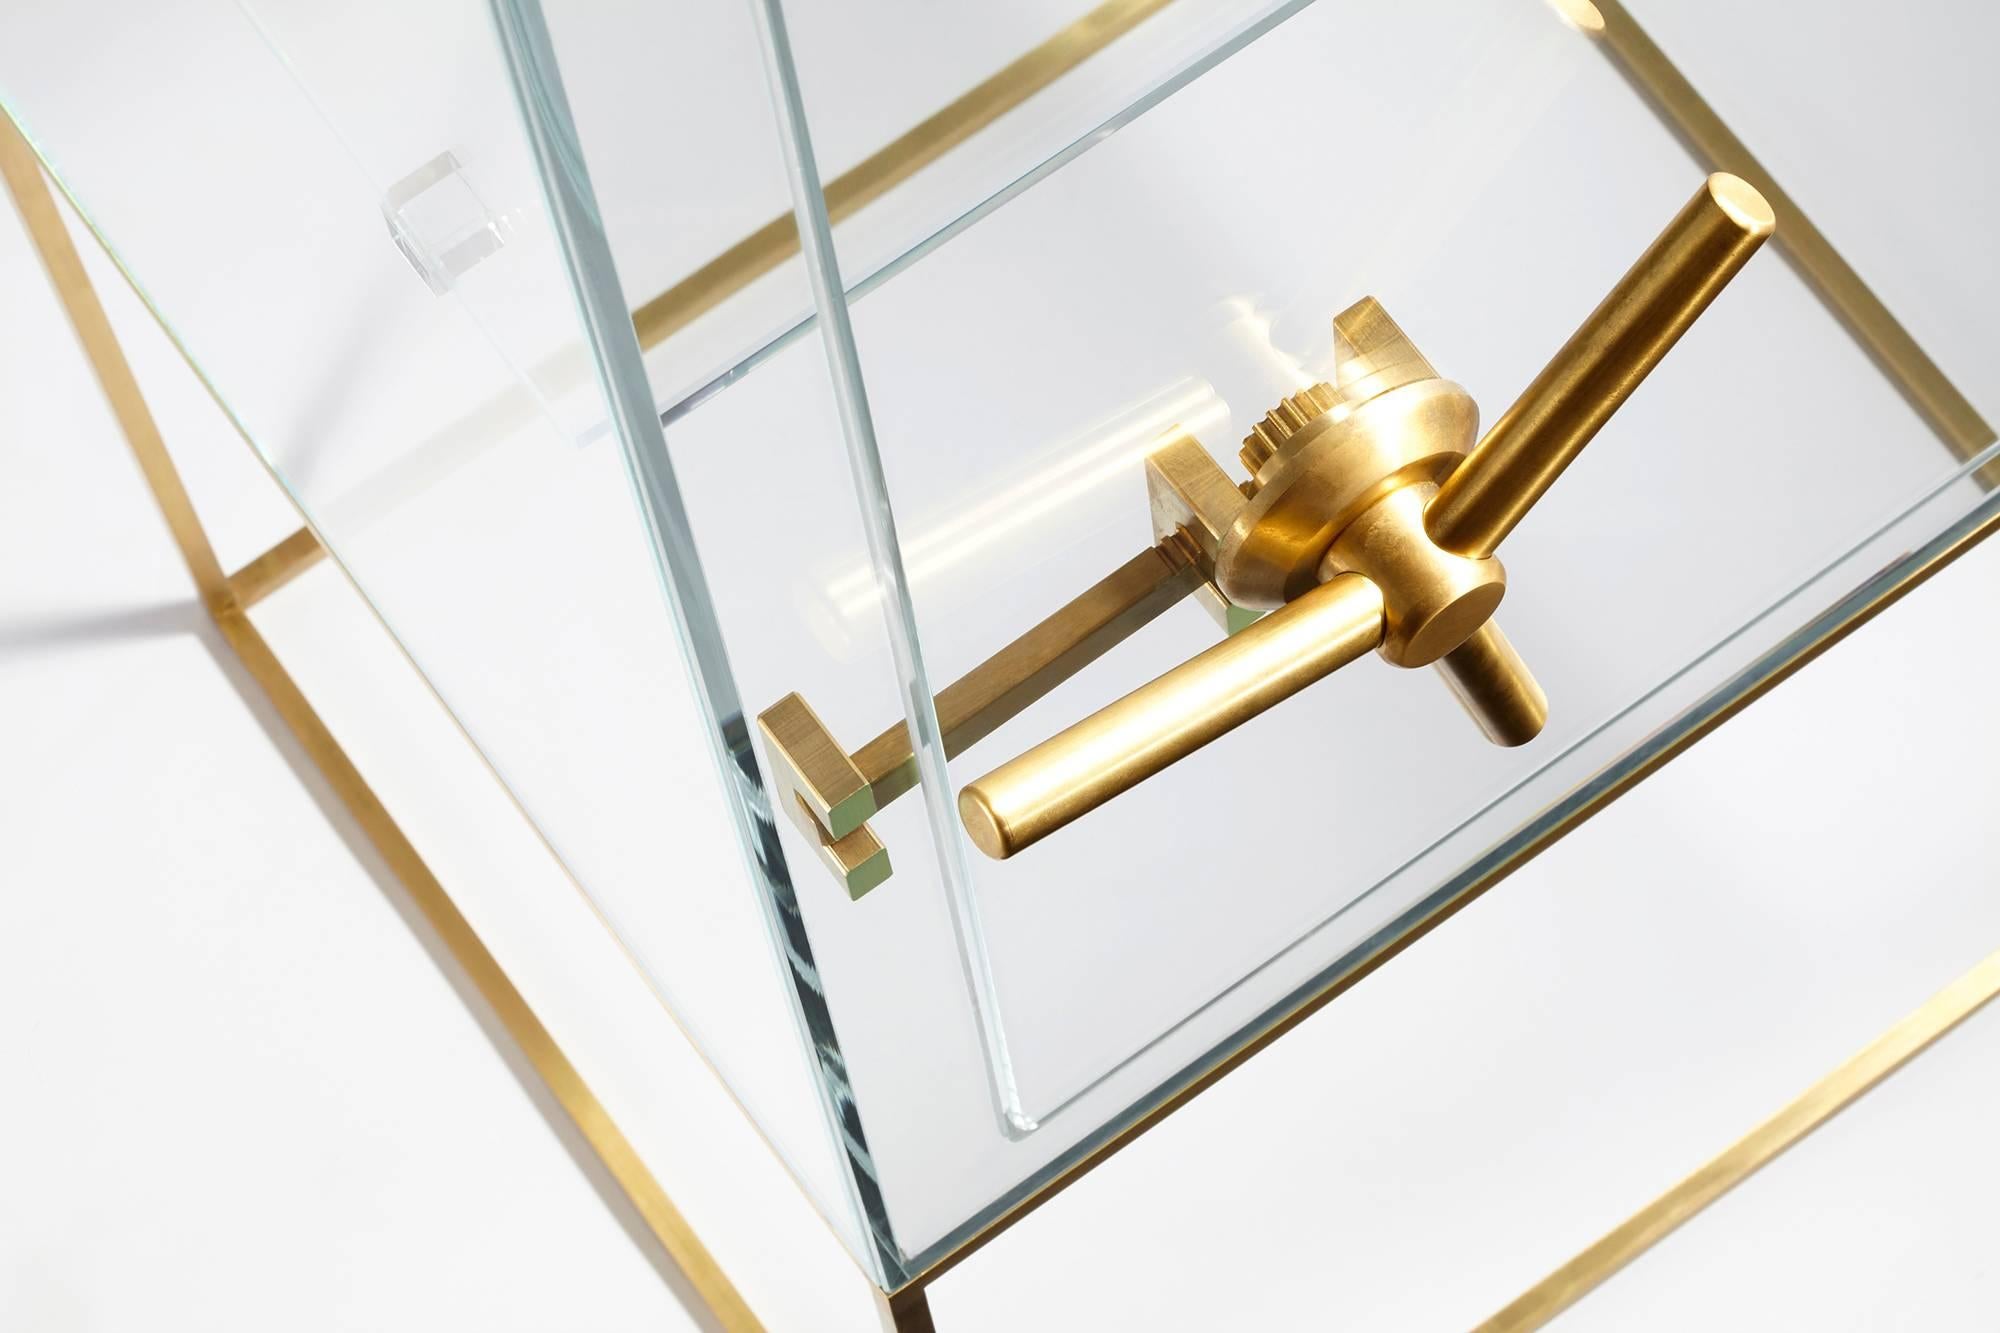 Storage furniture in transparent extra-light crystal with mechanism and base in brushed brass. 
As a real safe, it protects the content revealing the essence. 
A symbolic up-to-date object where everyone is free to decide what is worth